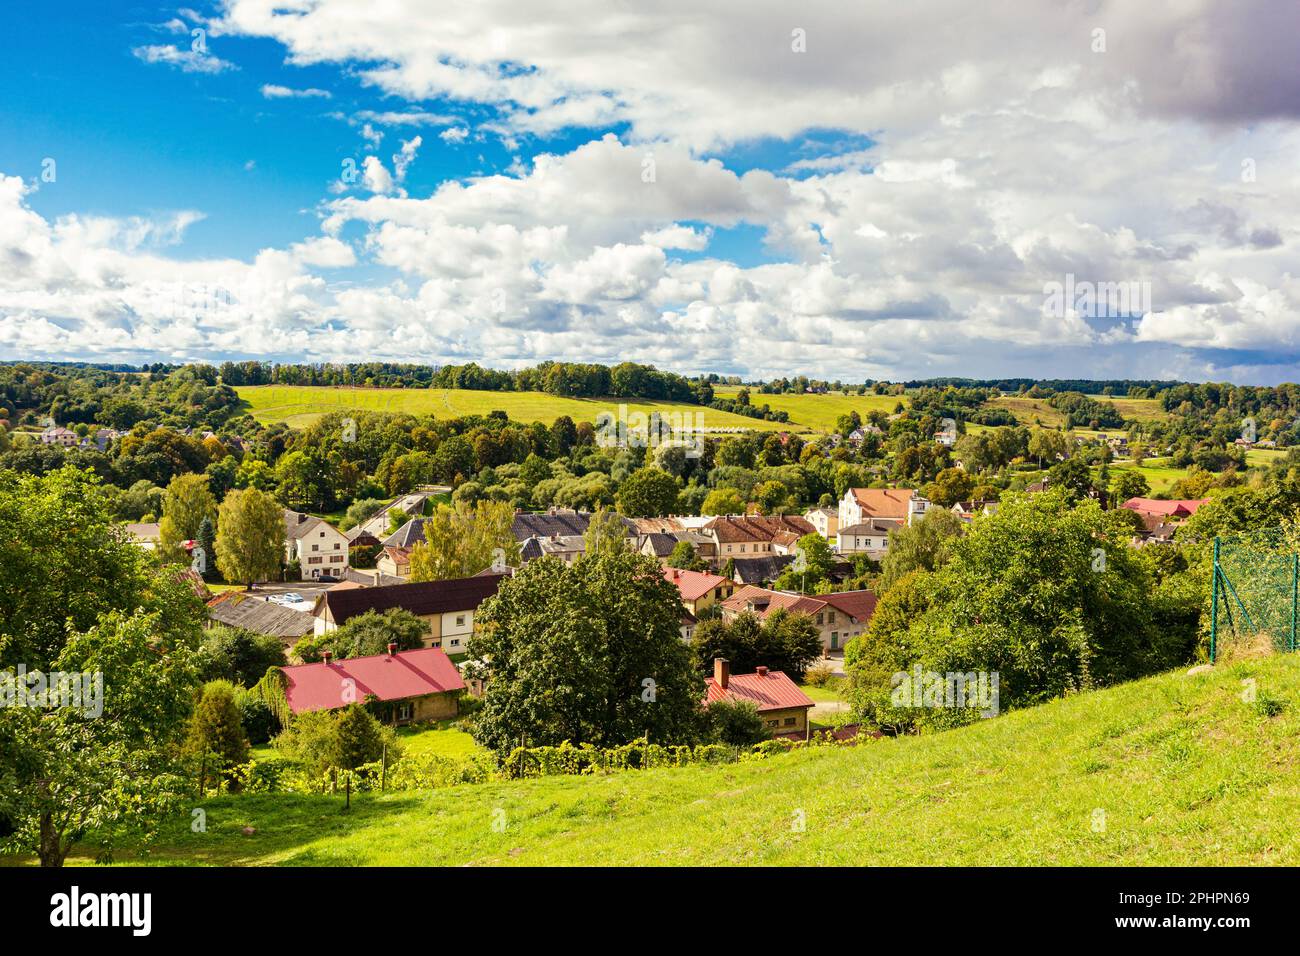 Old town Sabile in Latvia. Stock Photo